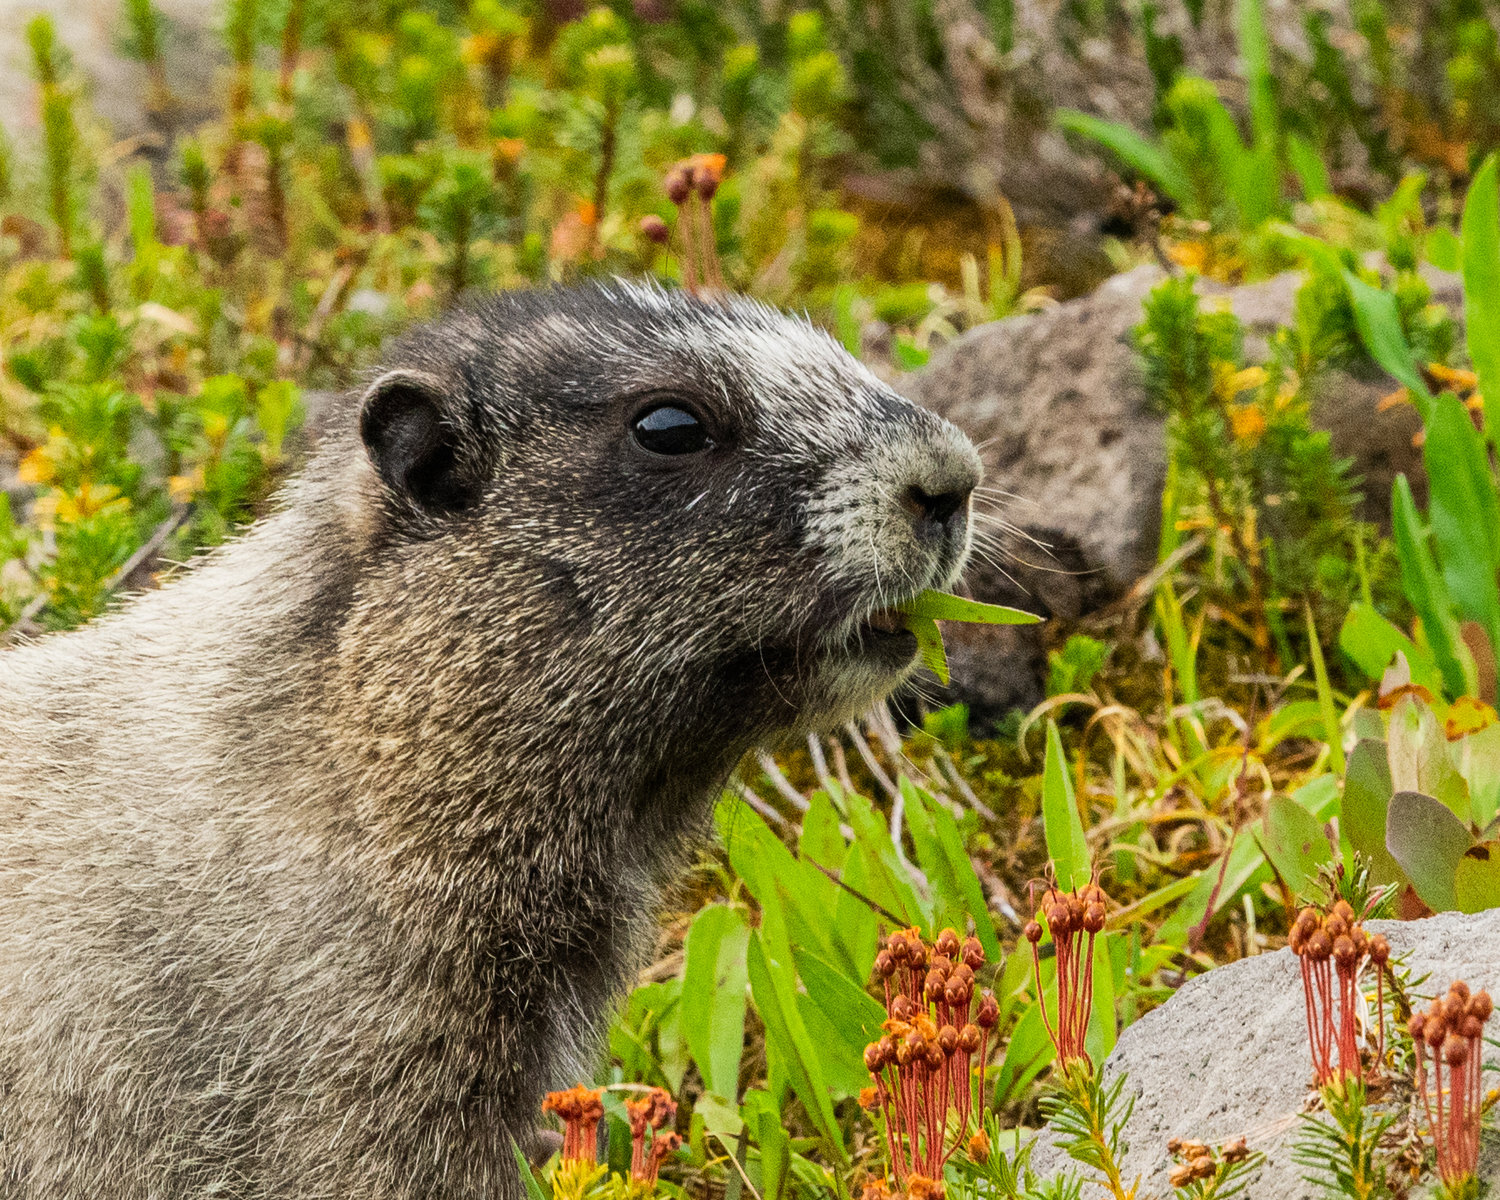 A marmot munches on leaves in a meadow near Mount Rainier on the Golden Gate Trail at Paradise on Wednesday afternoon.